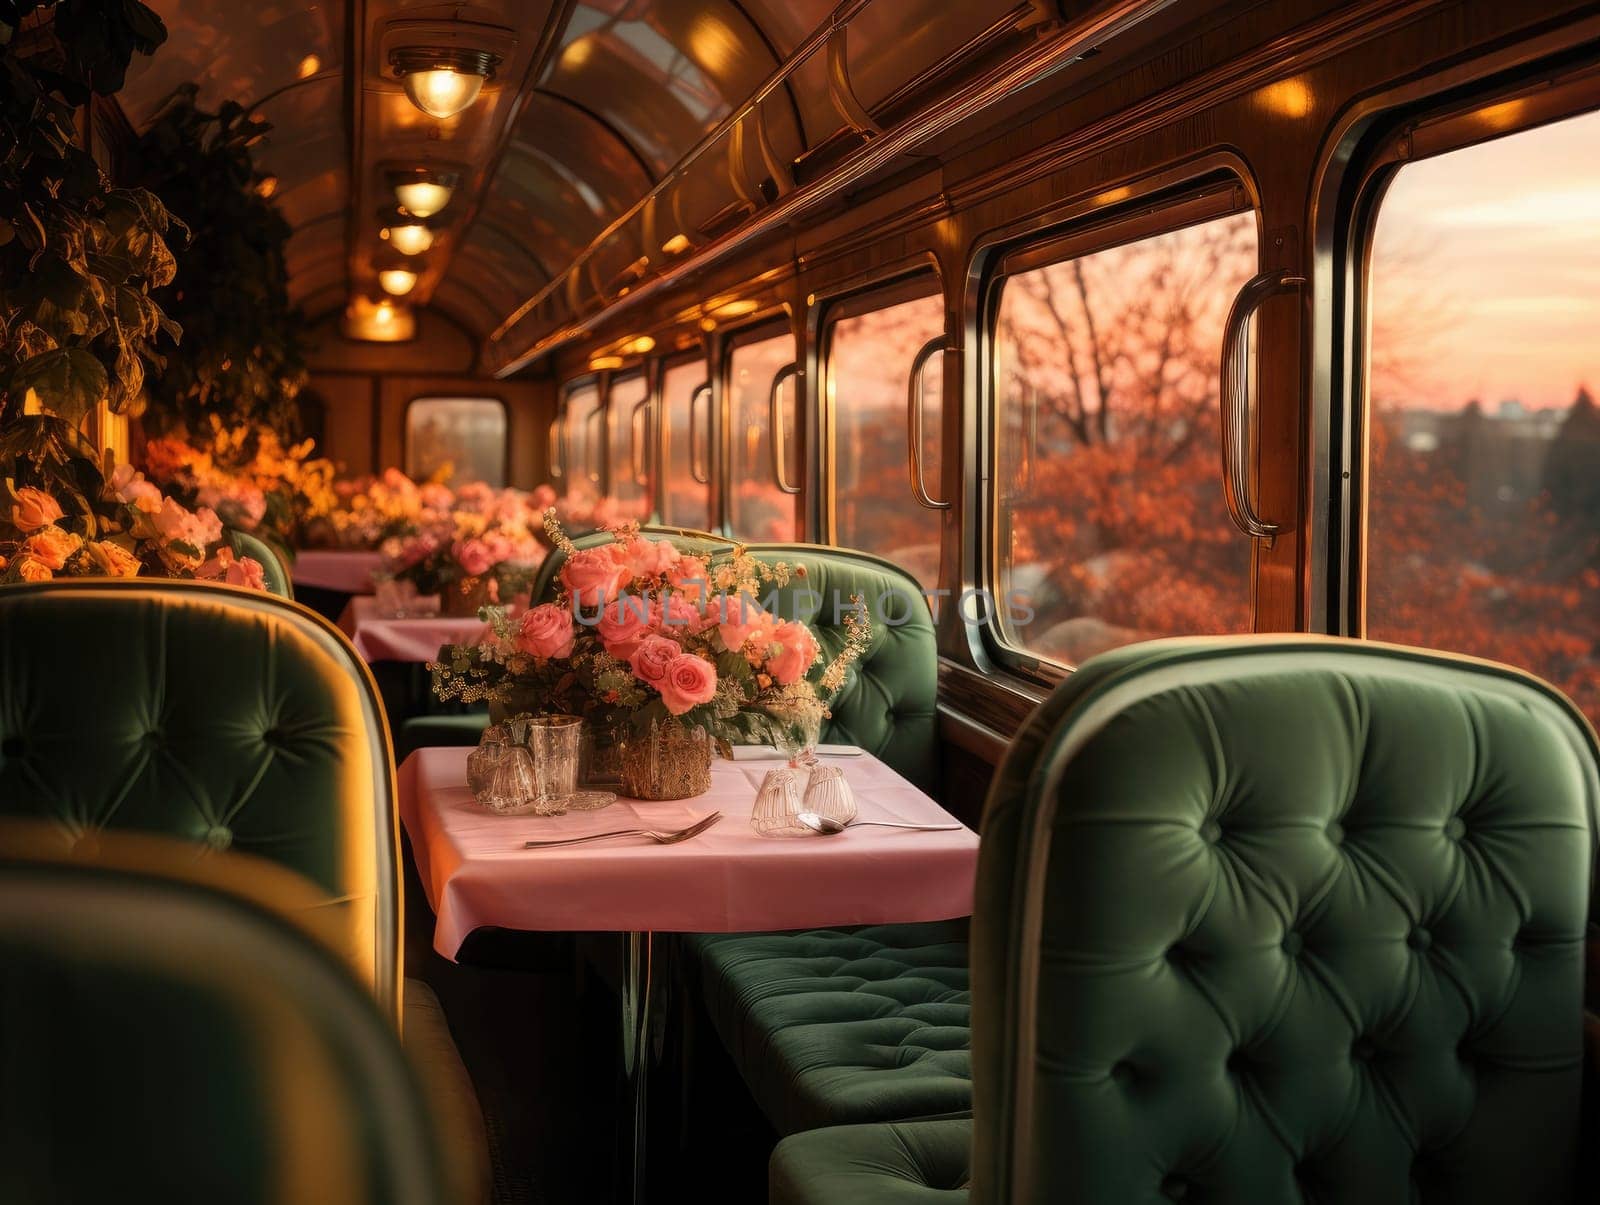 The interior of the train with a table, seats in light green, a flower vase on the table, and romantic scenery. Generative AI.